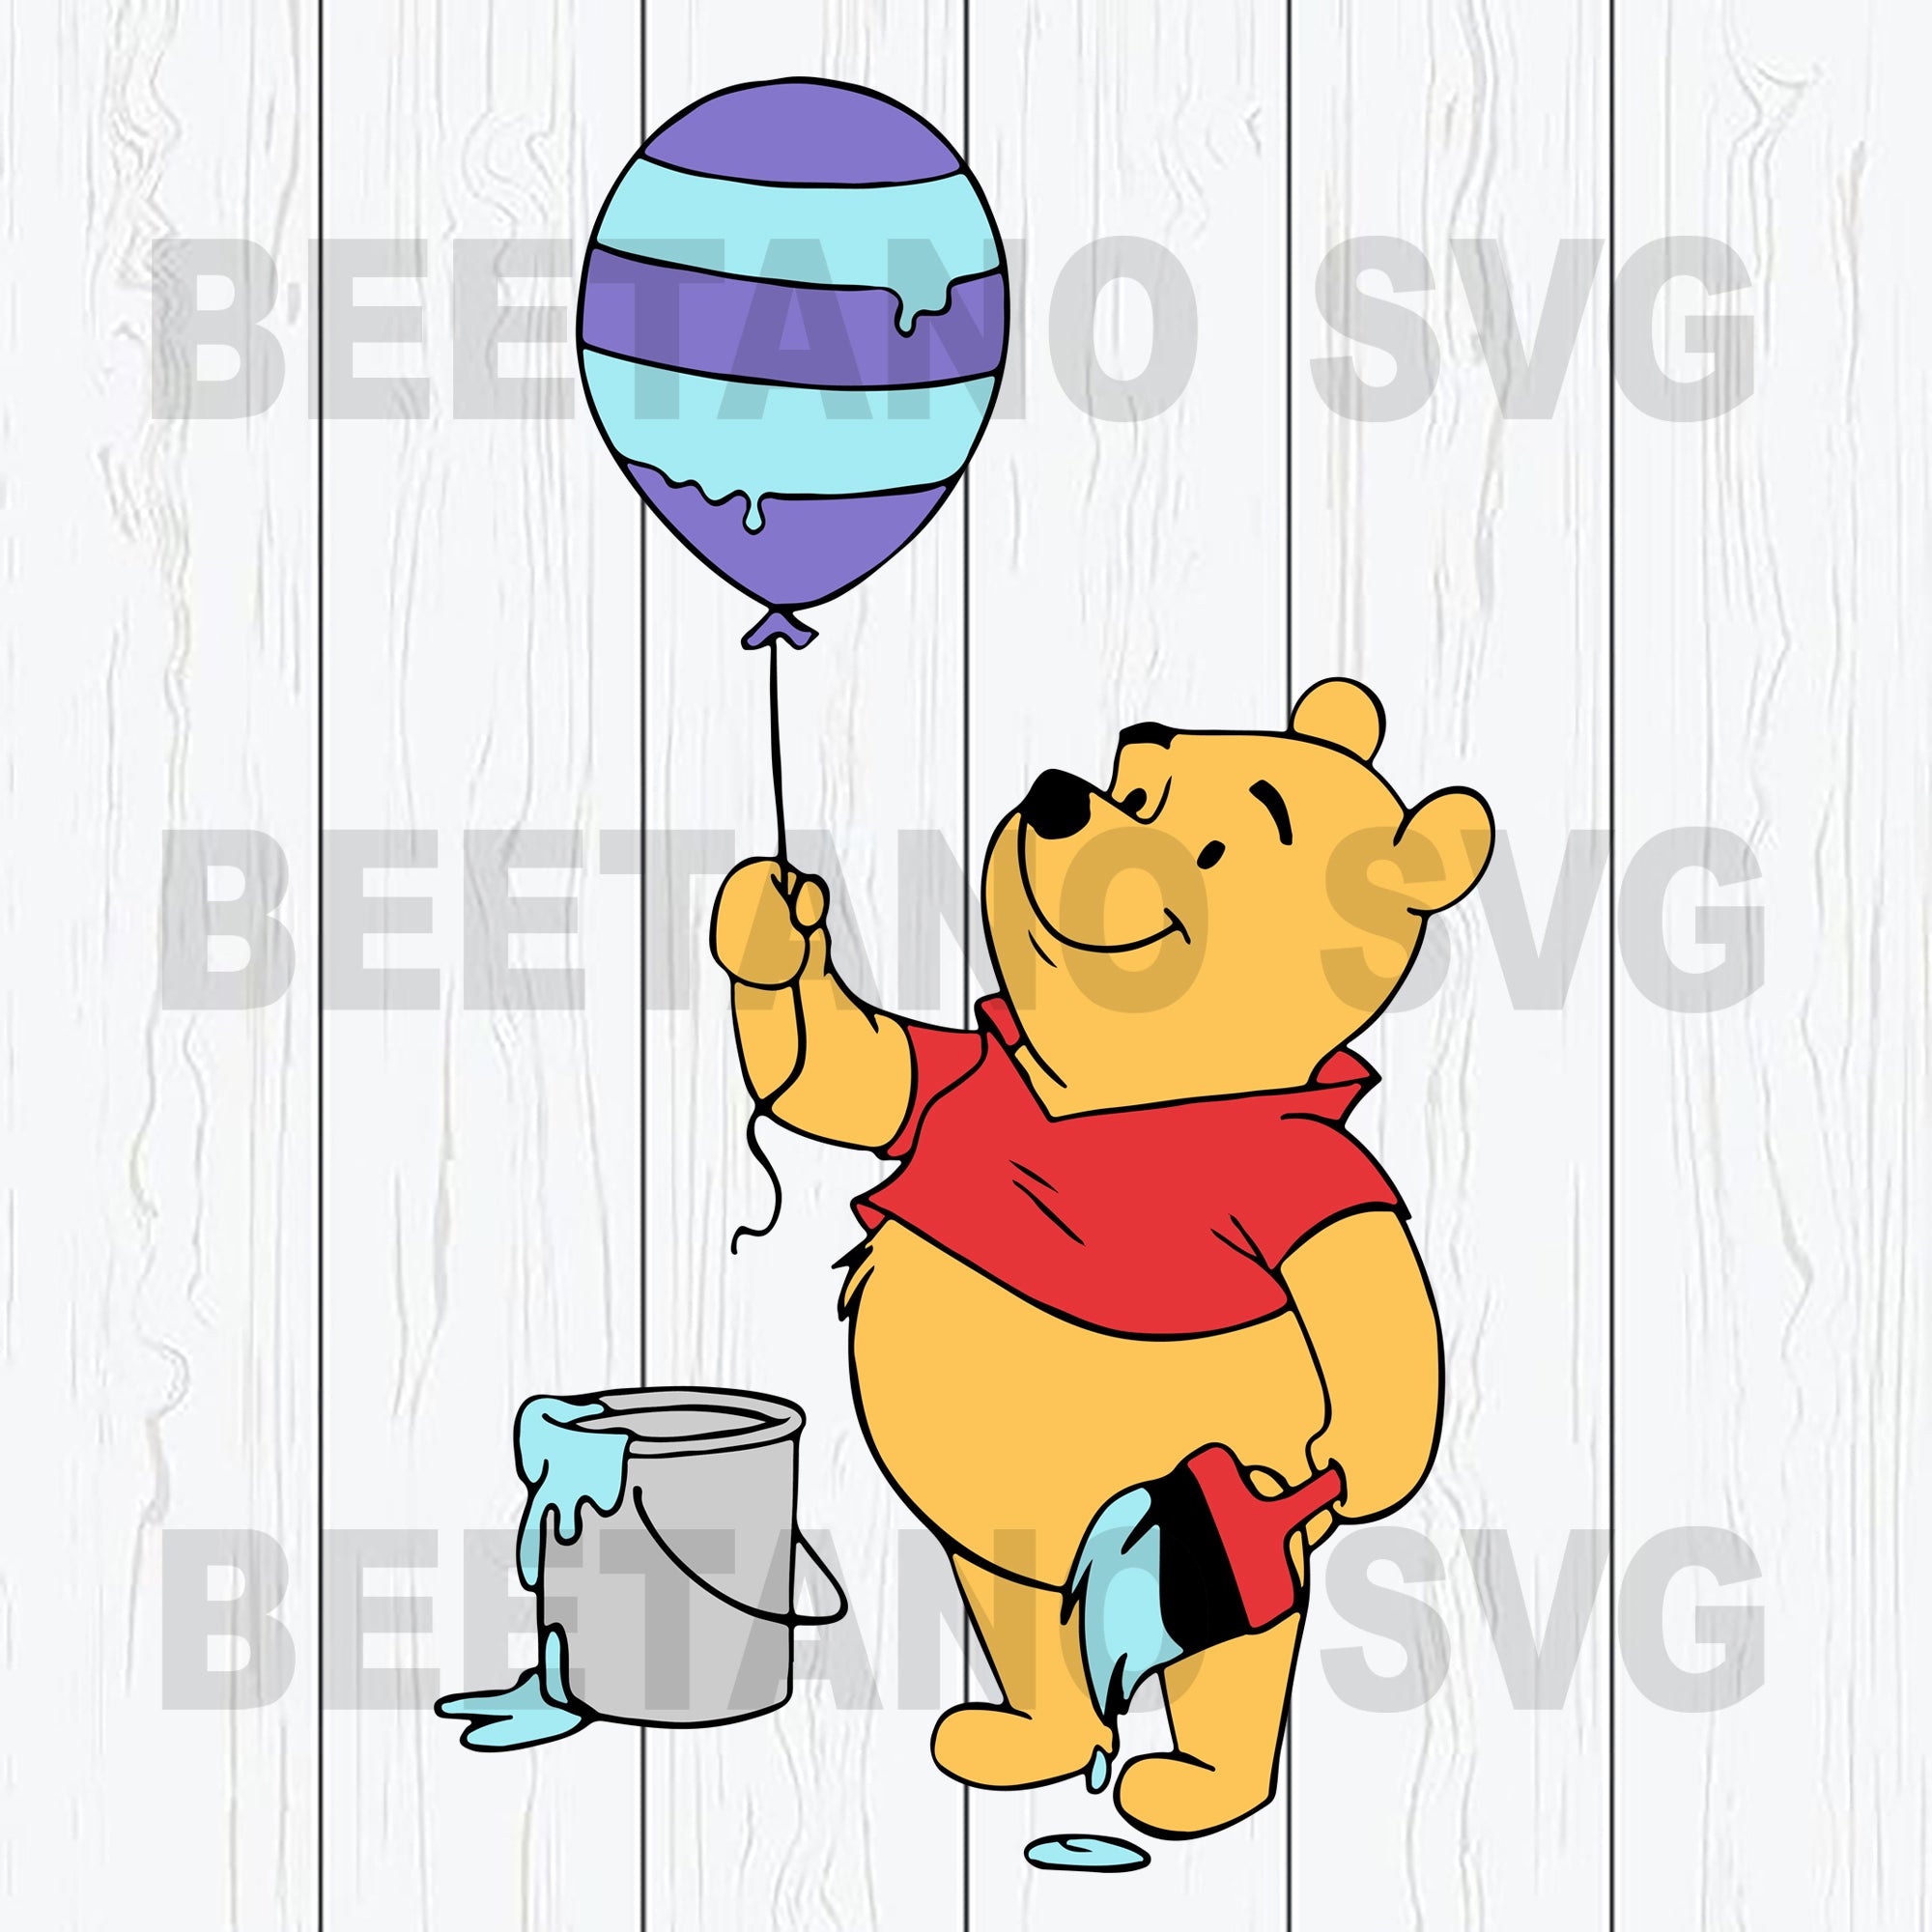 Download Winnie Pooh Easter Egg Svg Files Easter Egg Svg Winnie Pooh Svg File Beetanosvg Scalable Vector Graphics